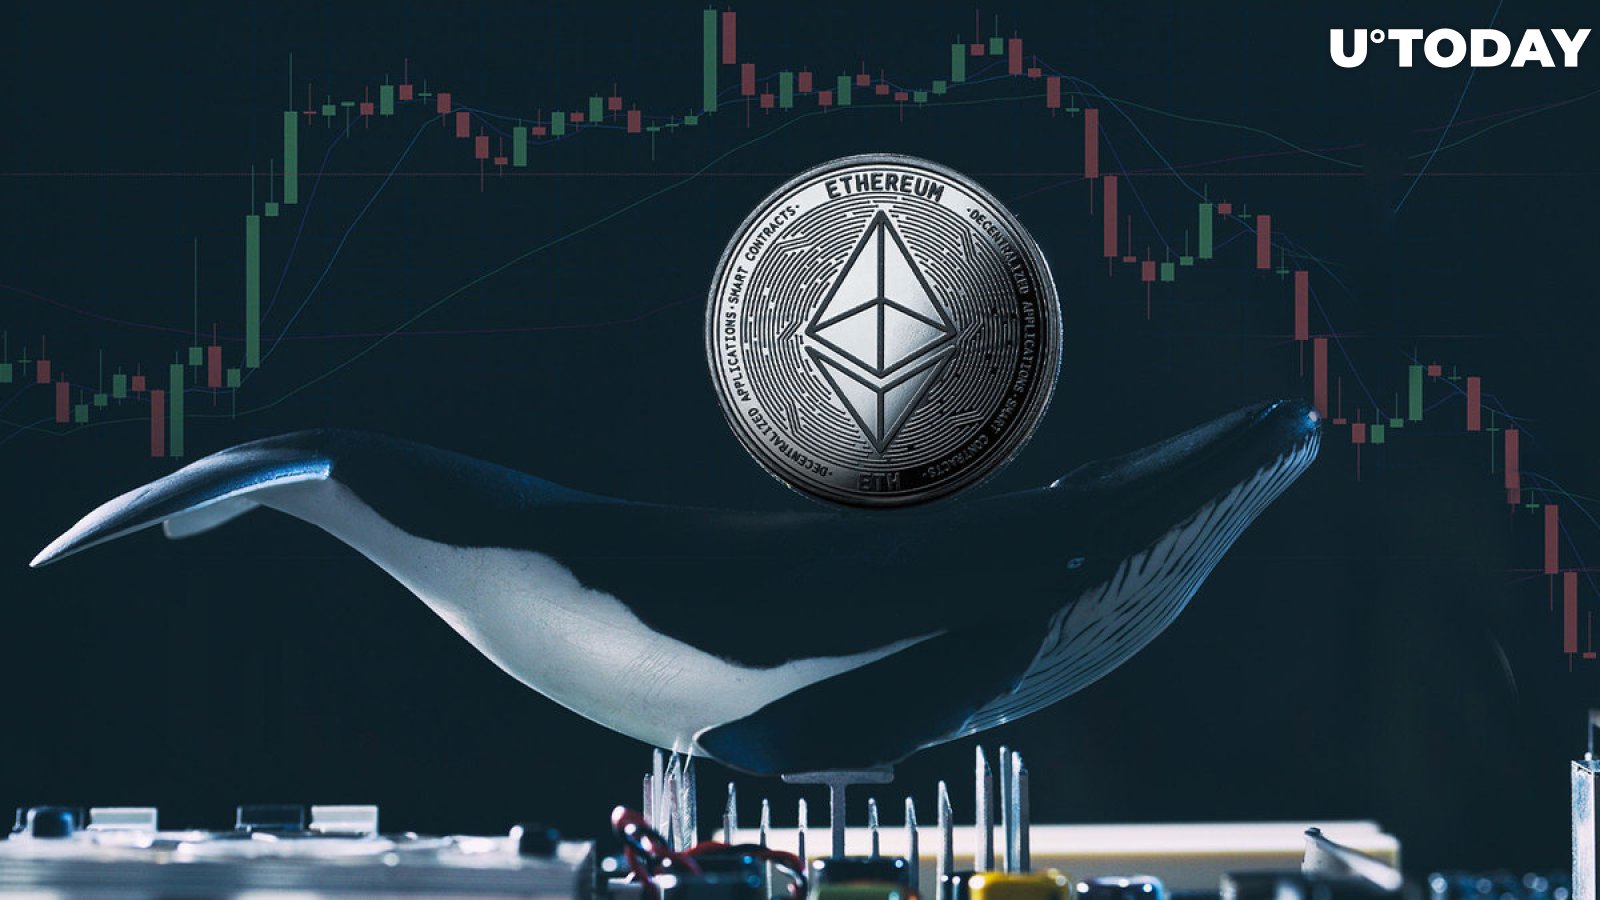 Ethereum (ETH) Drops 5%, Mysterious Whale Shows 'Very Strange' Behavior: Lookonchain